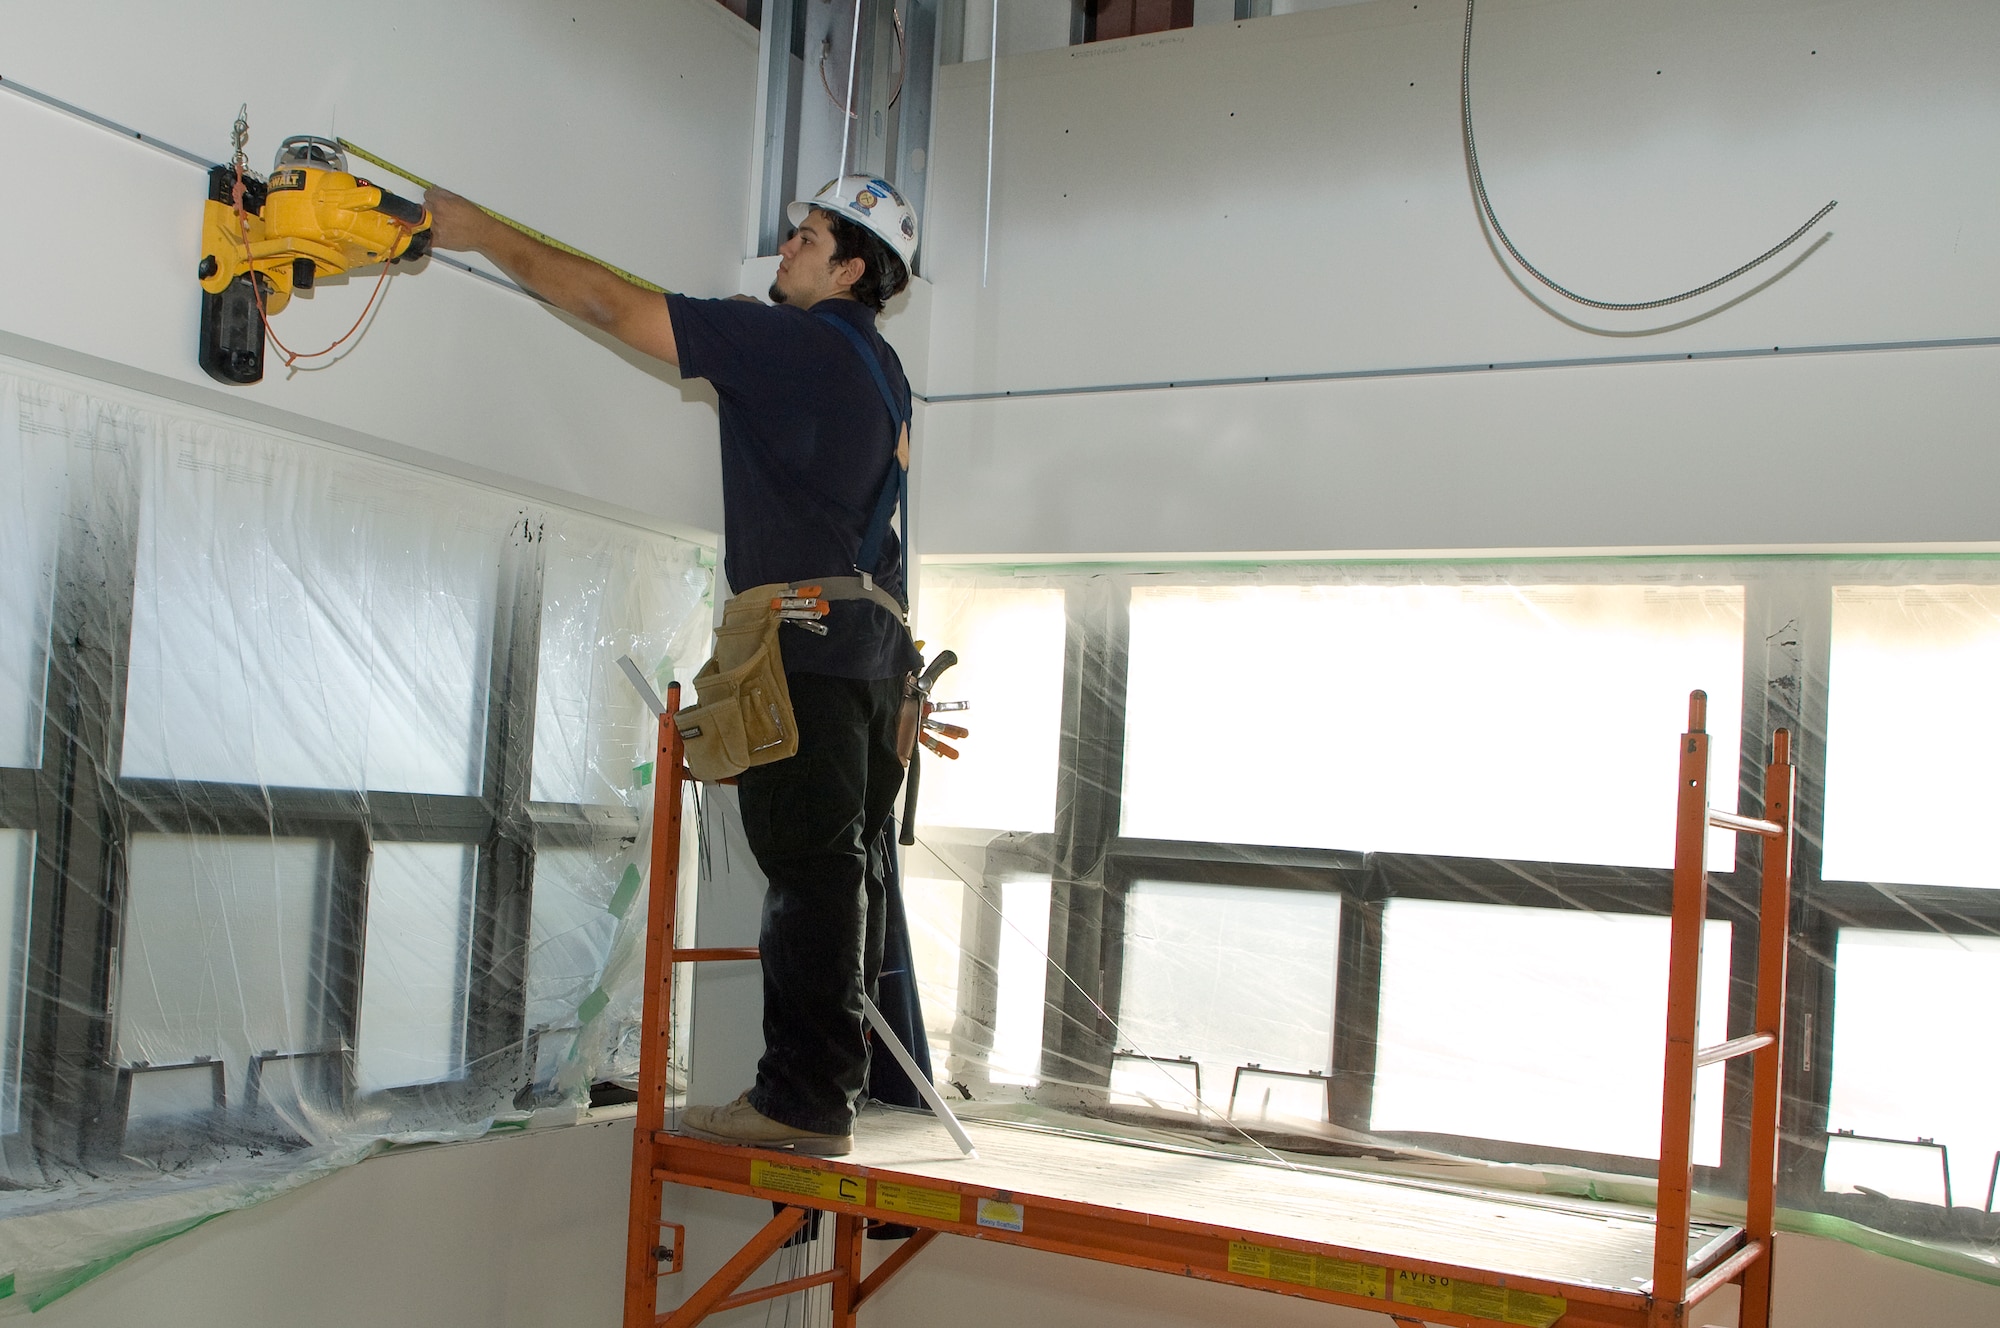 Antonio Marin of Advanced Acoustical Systems installs a drop ceiling on the second floor of Bldg 1604 last month.  The new facility, scheduled to open later in the spring, will offer increased space with comparatively reduced costs. (U.S. Air Force Photo by Mark Wyatt)